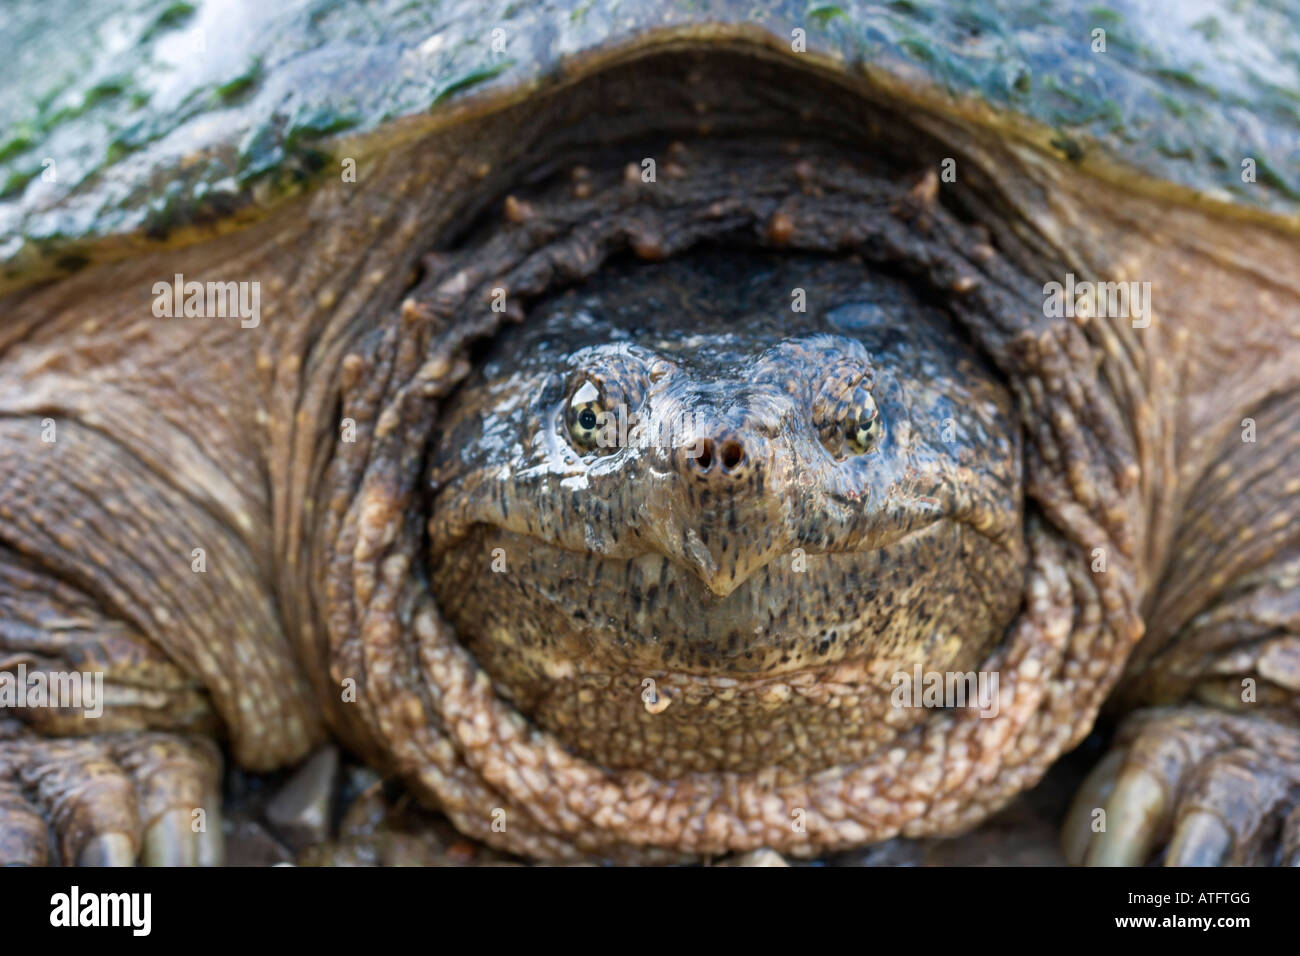 snapping turtle Stock Photo